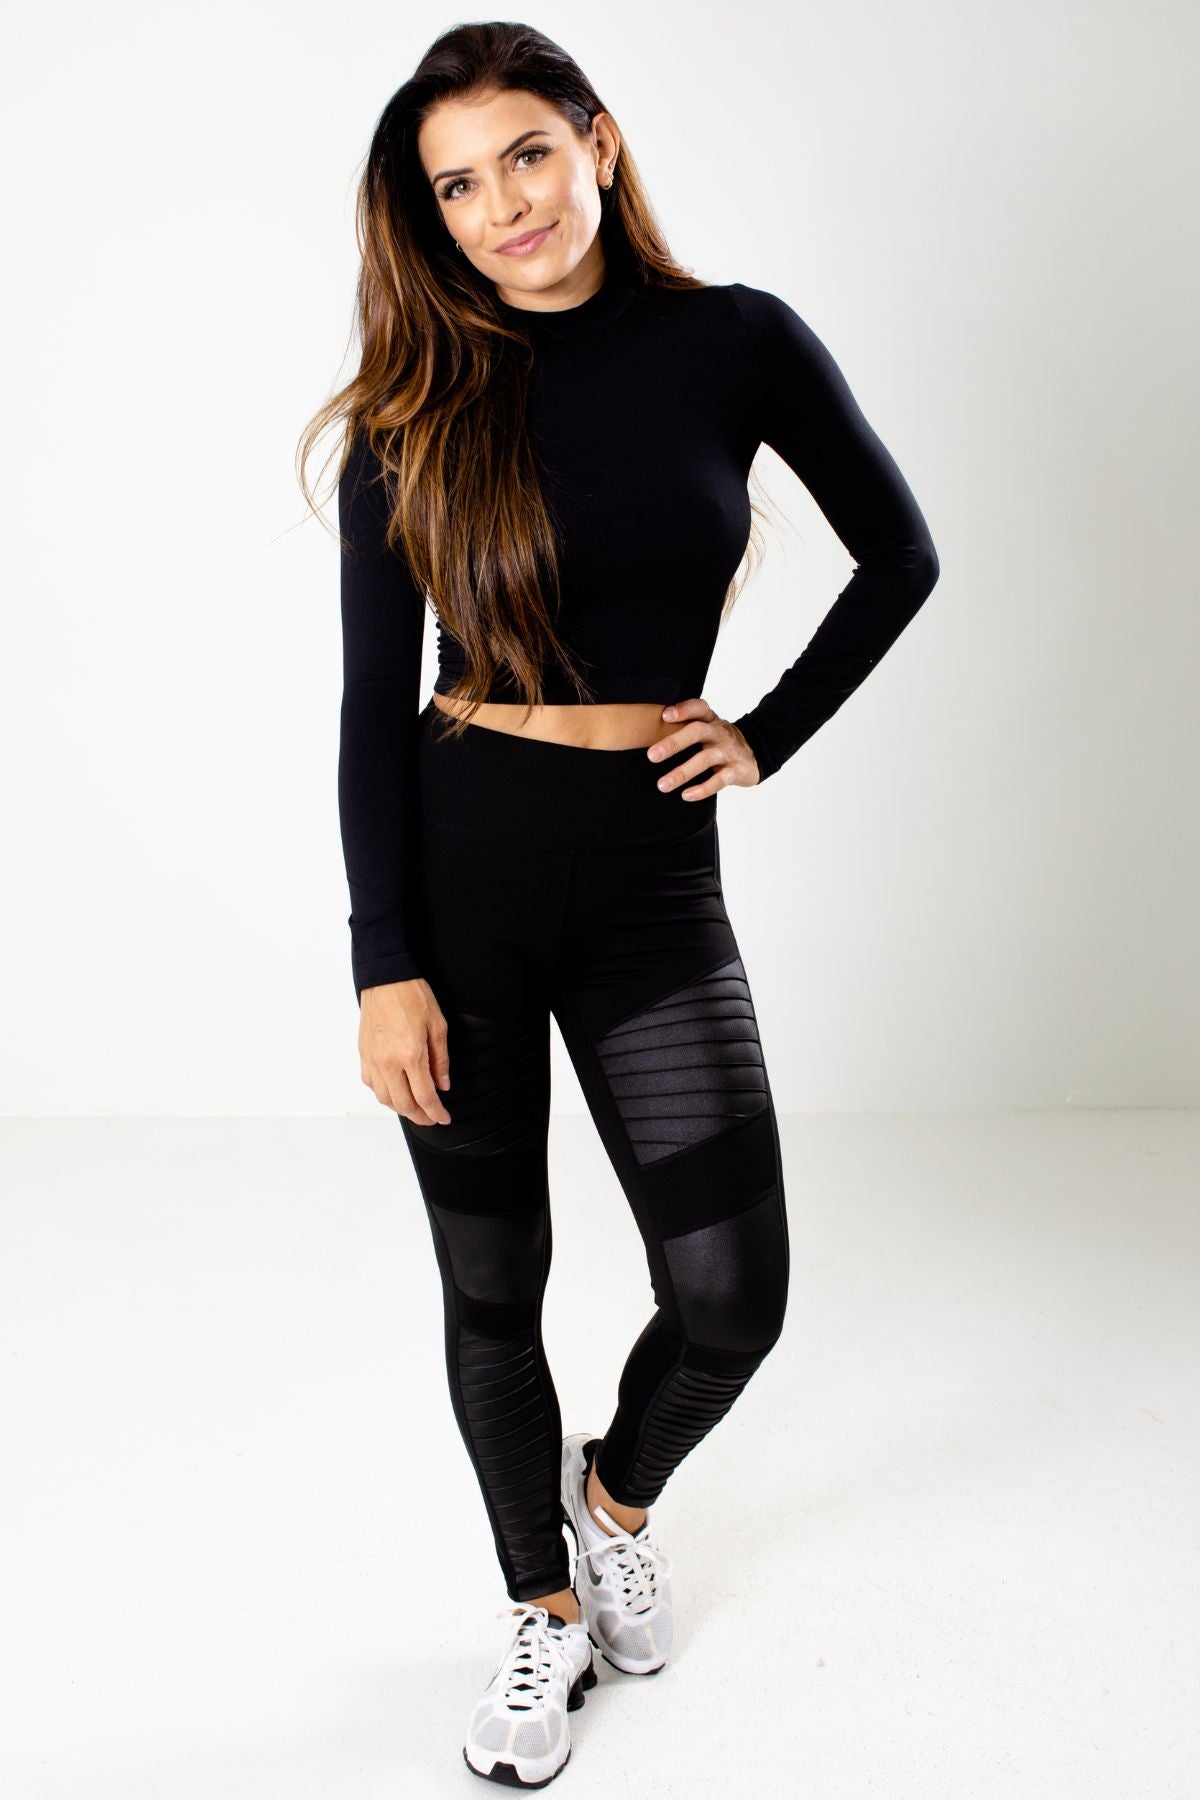 Black High-Quality Boutique Activewear Leggings for Women